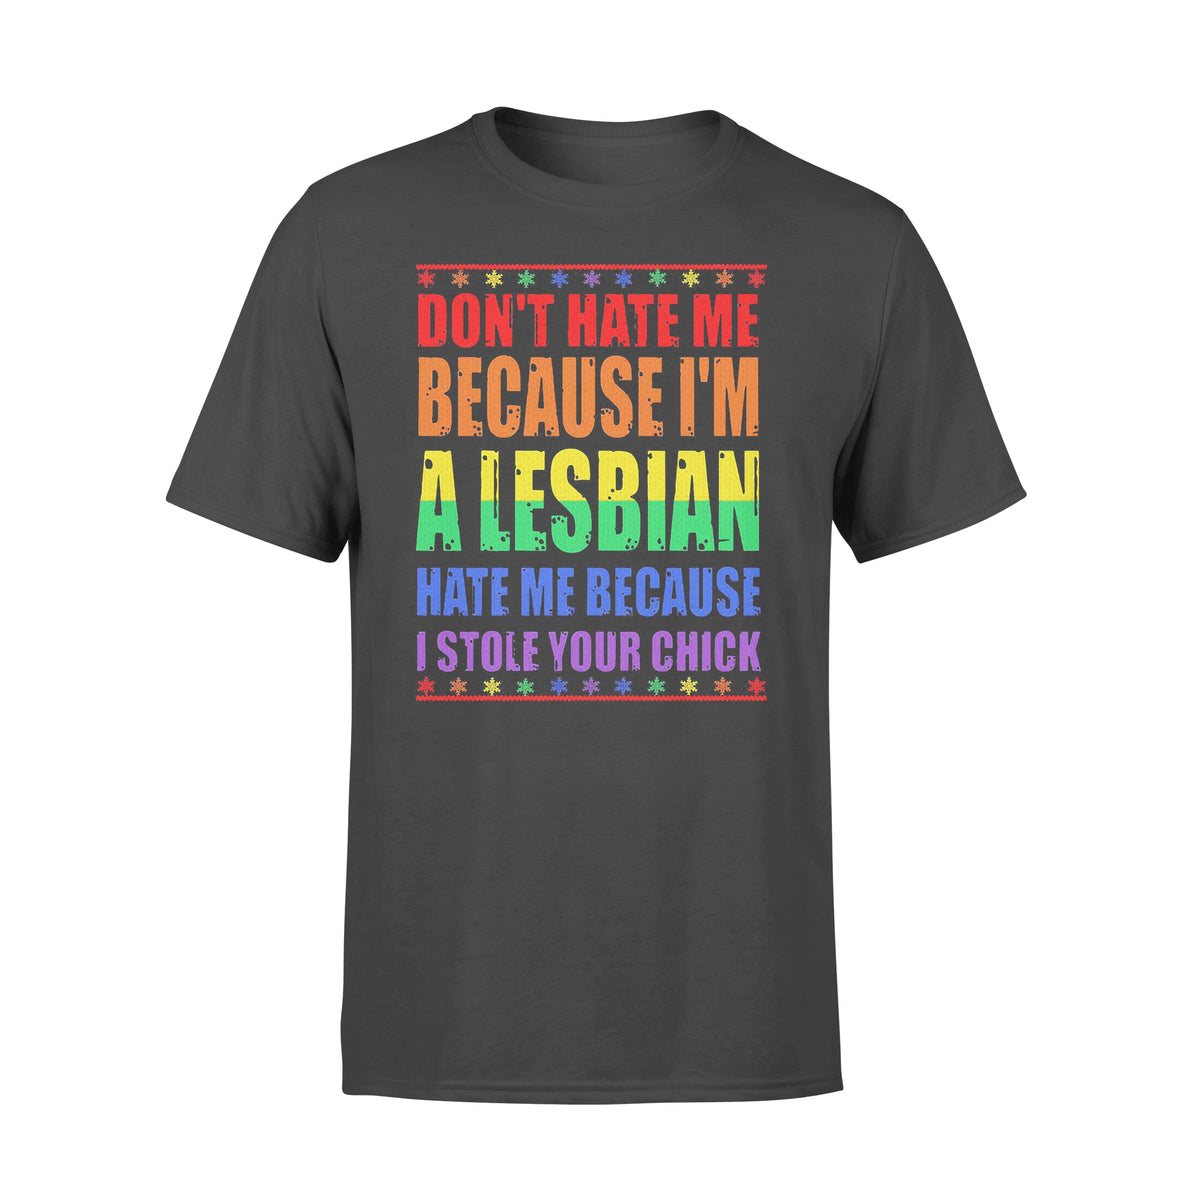 Lgbt Don T Hate Me Because I M A Lesbian Hate Me Because I Stole Your Chick T Shirt Unisex Tee From Allezyshirt